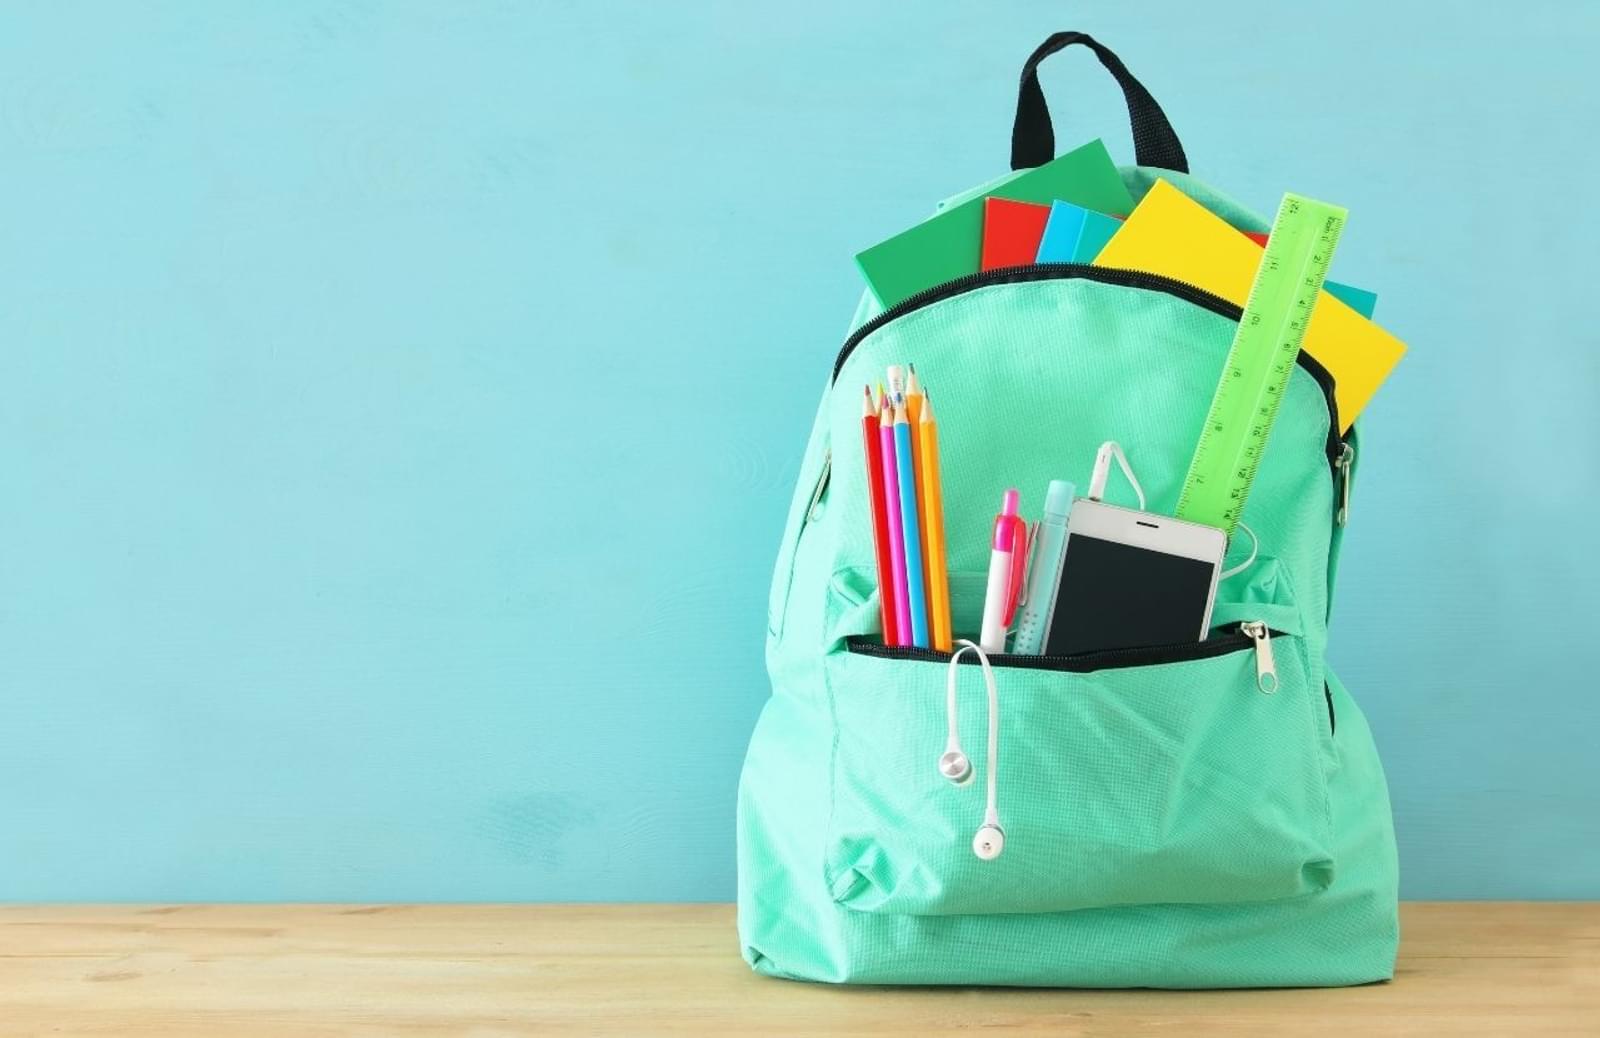 Green backpack filled with school supplies on desk